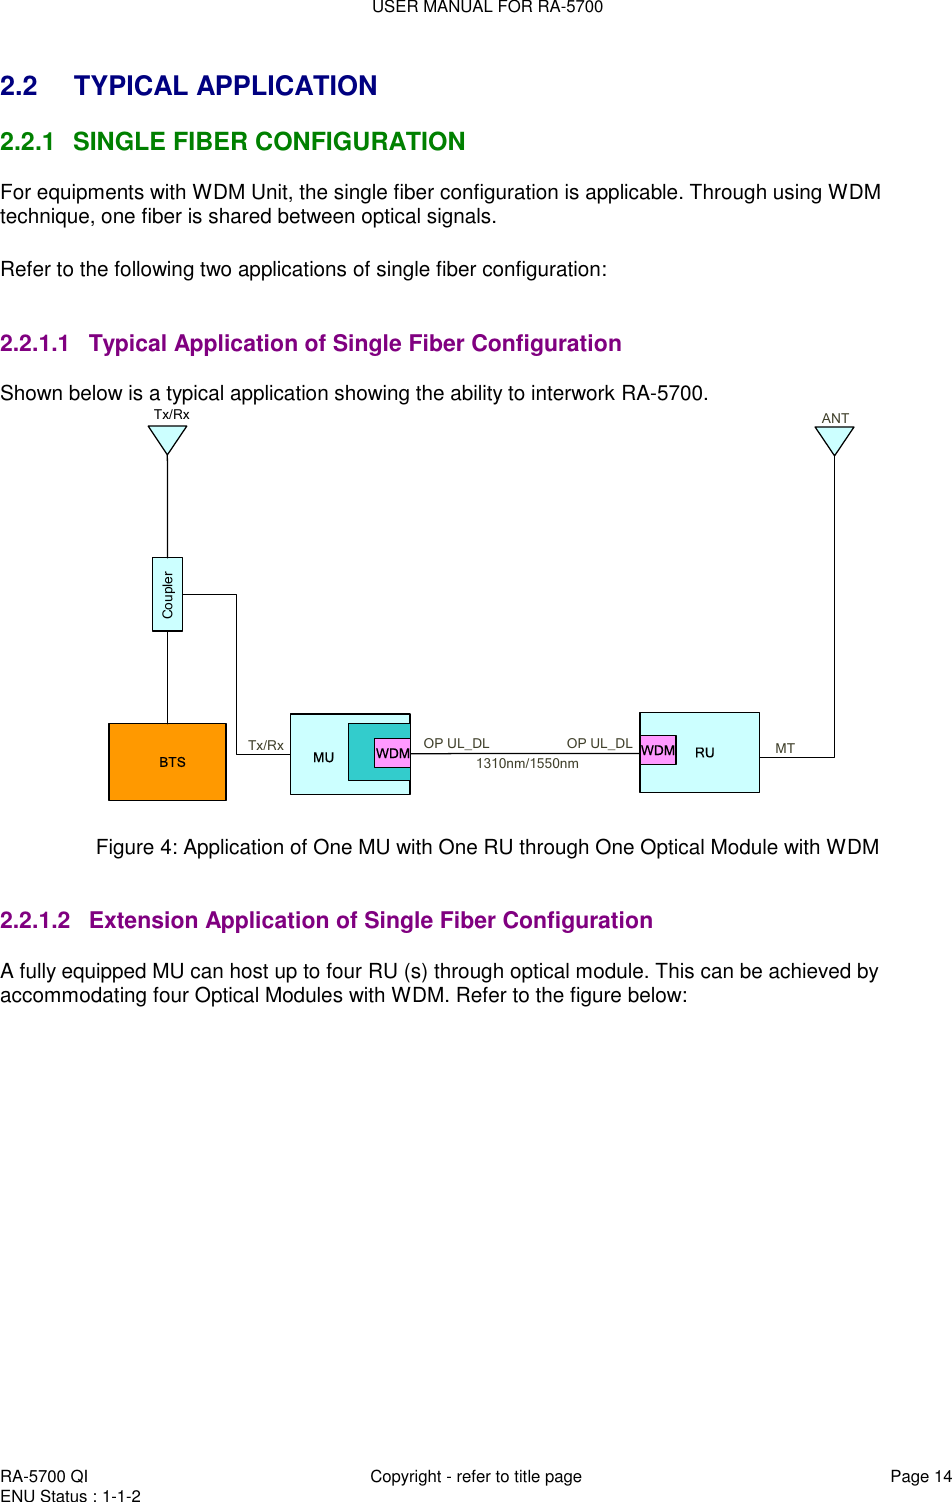 USER MANUAL FOR RA-5700  RA-5700 QI  Copyright - refer to title page Page 14 ENU Status : 1-1-2    2.2  TYPICAL APPLICATION 2.2.1   SINGLE FIBER CONFIGURATION For equipments with WDM Unit, the single fiber configuration is applicable. Through using WDM technique, one fiber is shared between optical signals.   Refer to the following two applications of single fiber configuration:   2.2.1.1  Typical Application of Single Fiber Configuration  Shown below is a typical application showing the ability to interwork RA-5700.  Tx/RxTx/RxCouplerBTSMTANTMUOP UL_DL OP UL_DL1310nm/1550nmWDM RUWDM   Figure 4: Application of One MU with One RU through One Optical Module with WDM   2.2.1.2  Extension Application of Single Fiber Configuration  A fully equipped MU can host up to four RU (s) through optical module. This can be achieved by accommodating four Optical Modules with WDM. Refer to the figure below: 